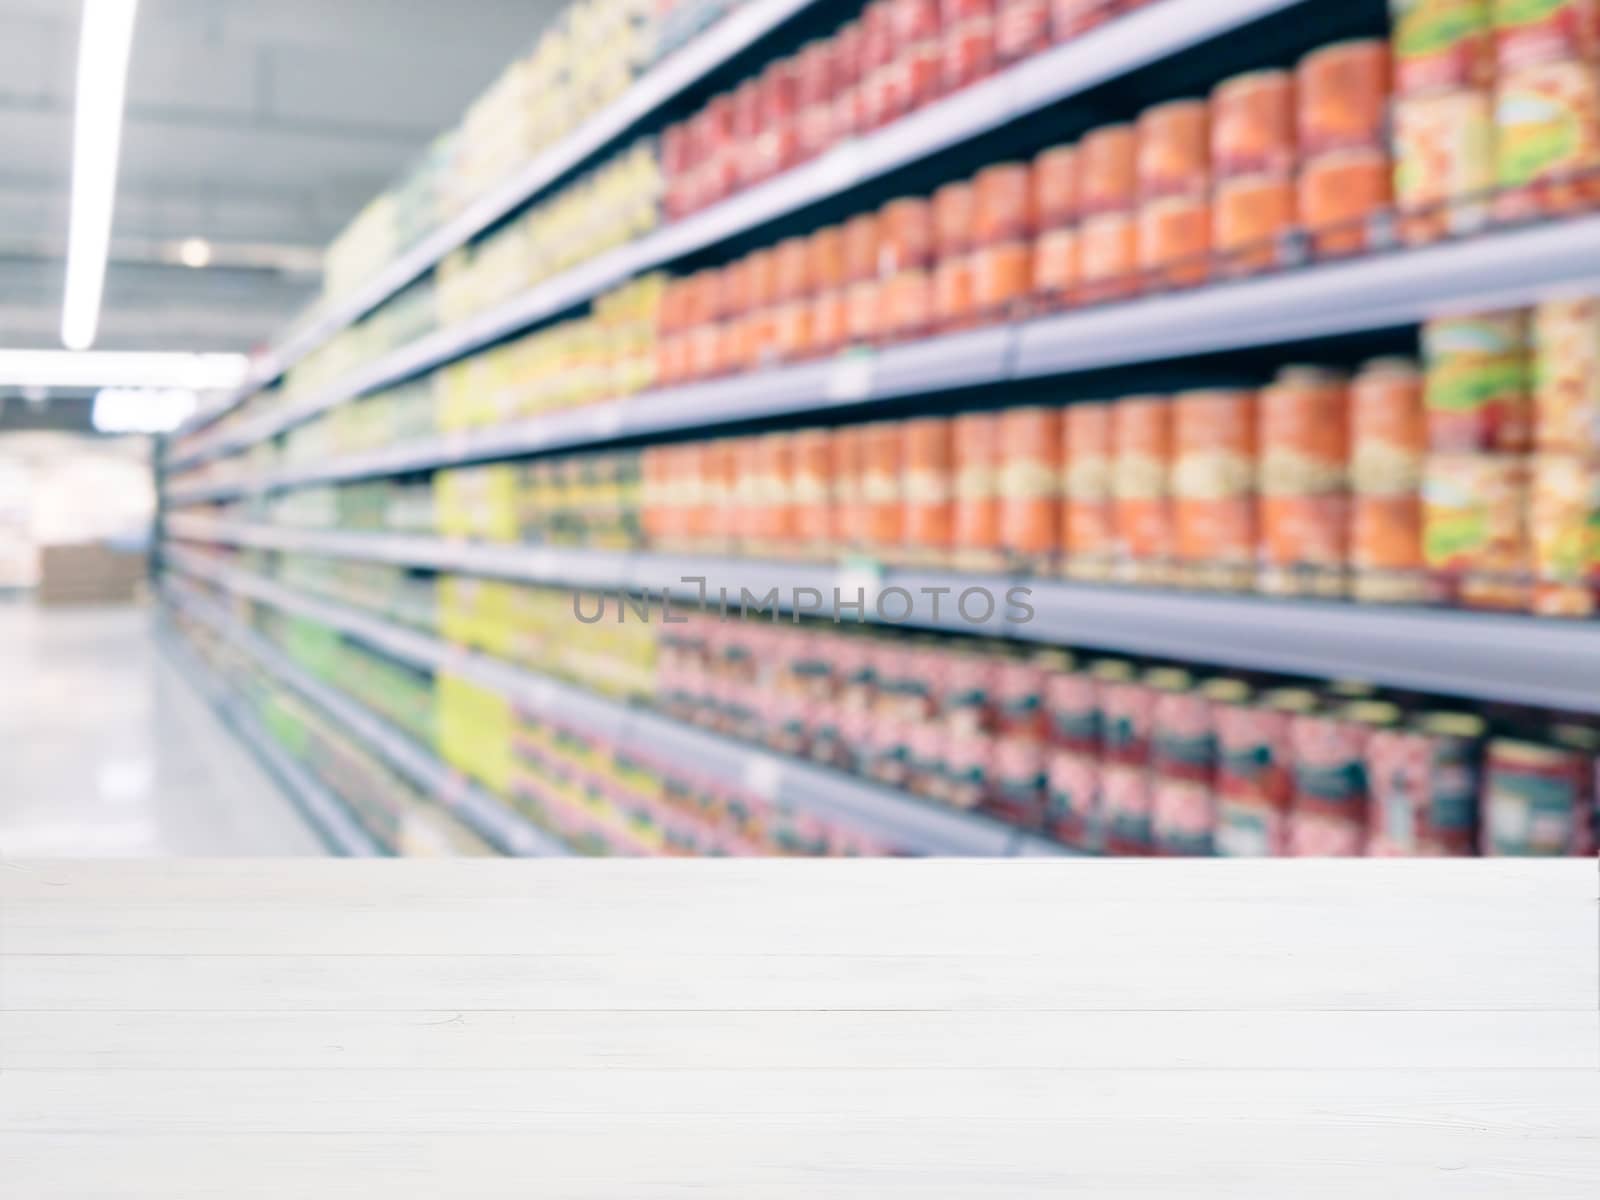  Blurred colorful supermarket products on shelves by fascinadora